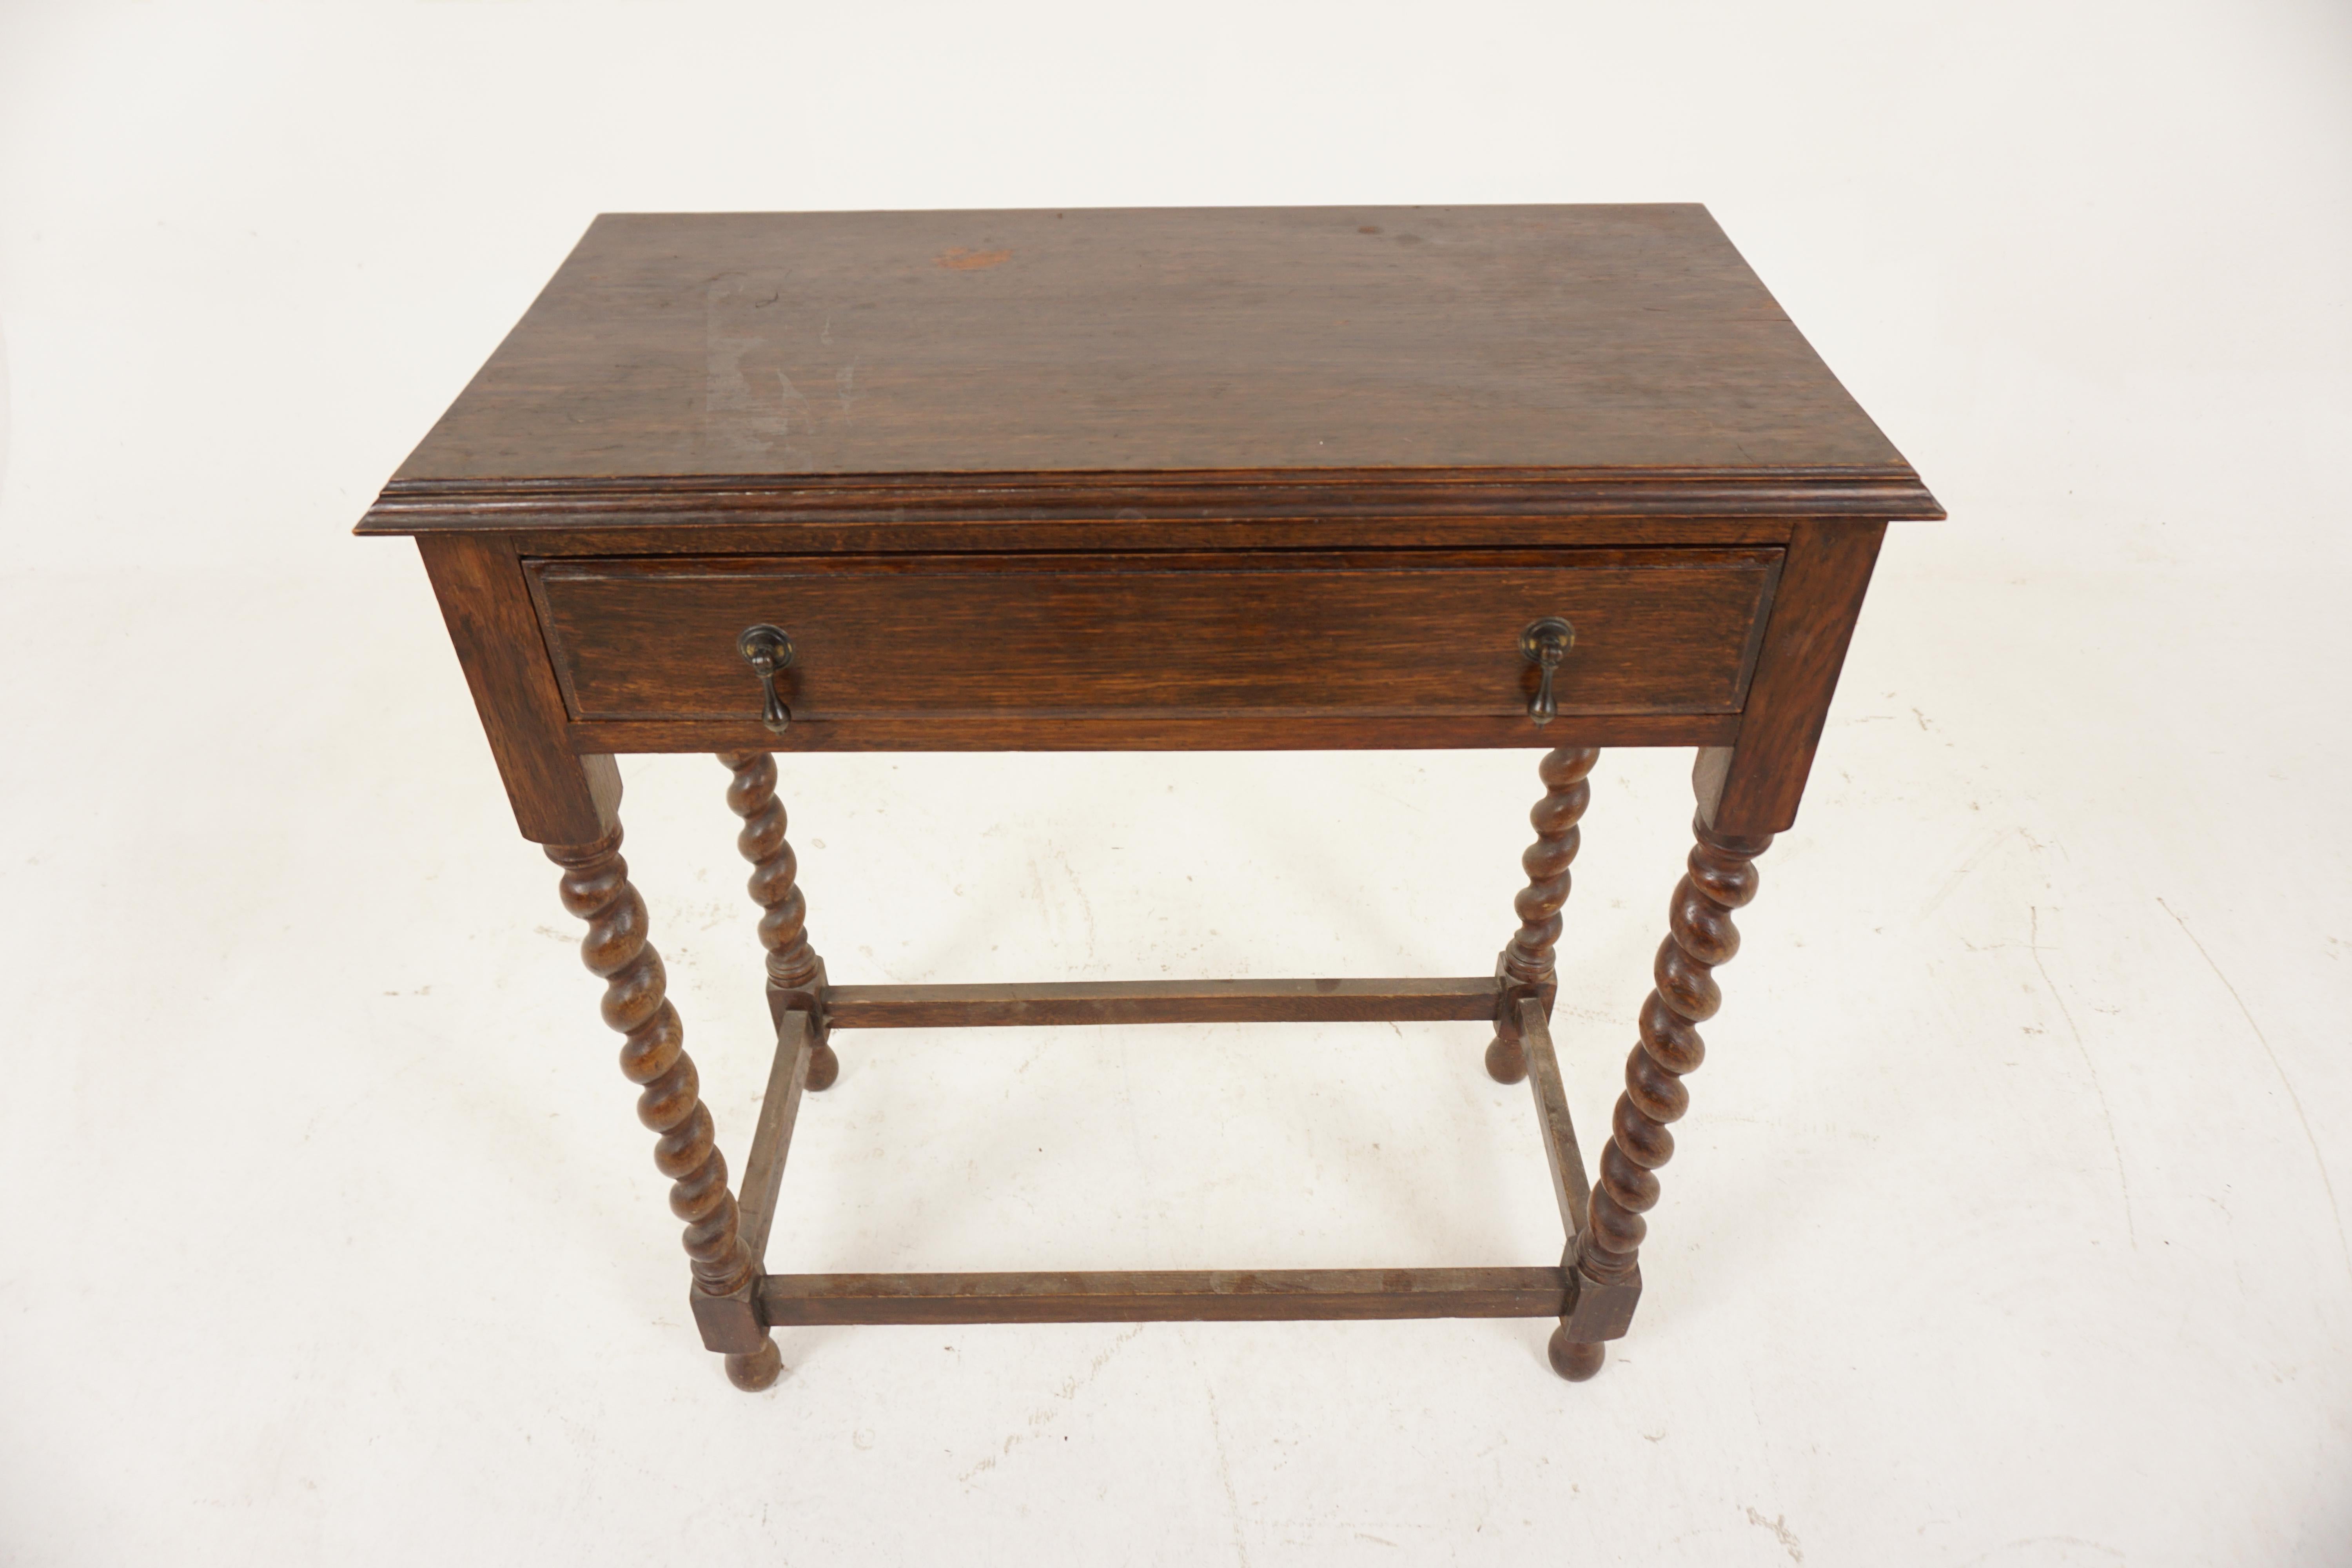 Vintage Barley Twist Oak Hall Table, Sofa Table, Scotland 1920, B1080

Scotland 1920
Solid Oak
Original Finish
Rectangular moulded top
Drawers with original hardware
All standing on barley twist legs
Joined by stretchers on the base
Some